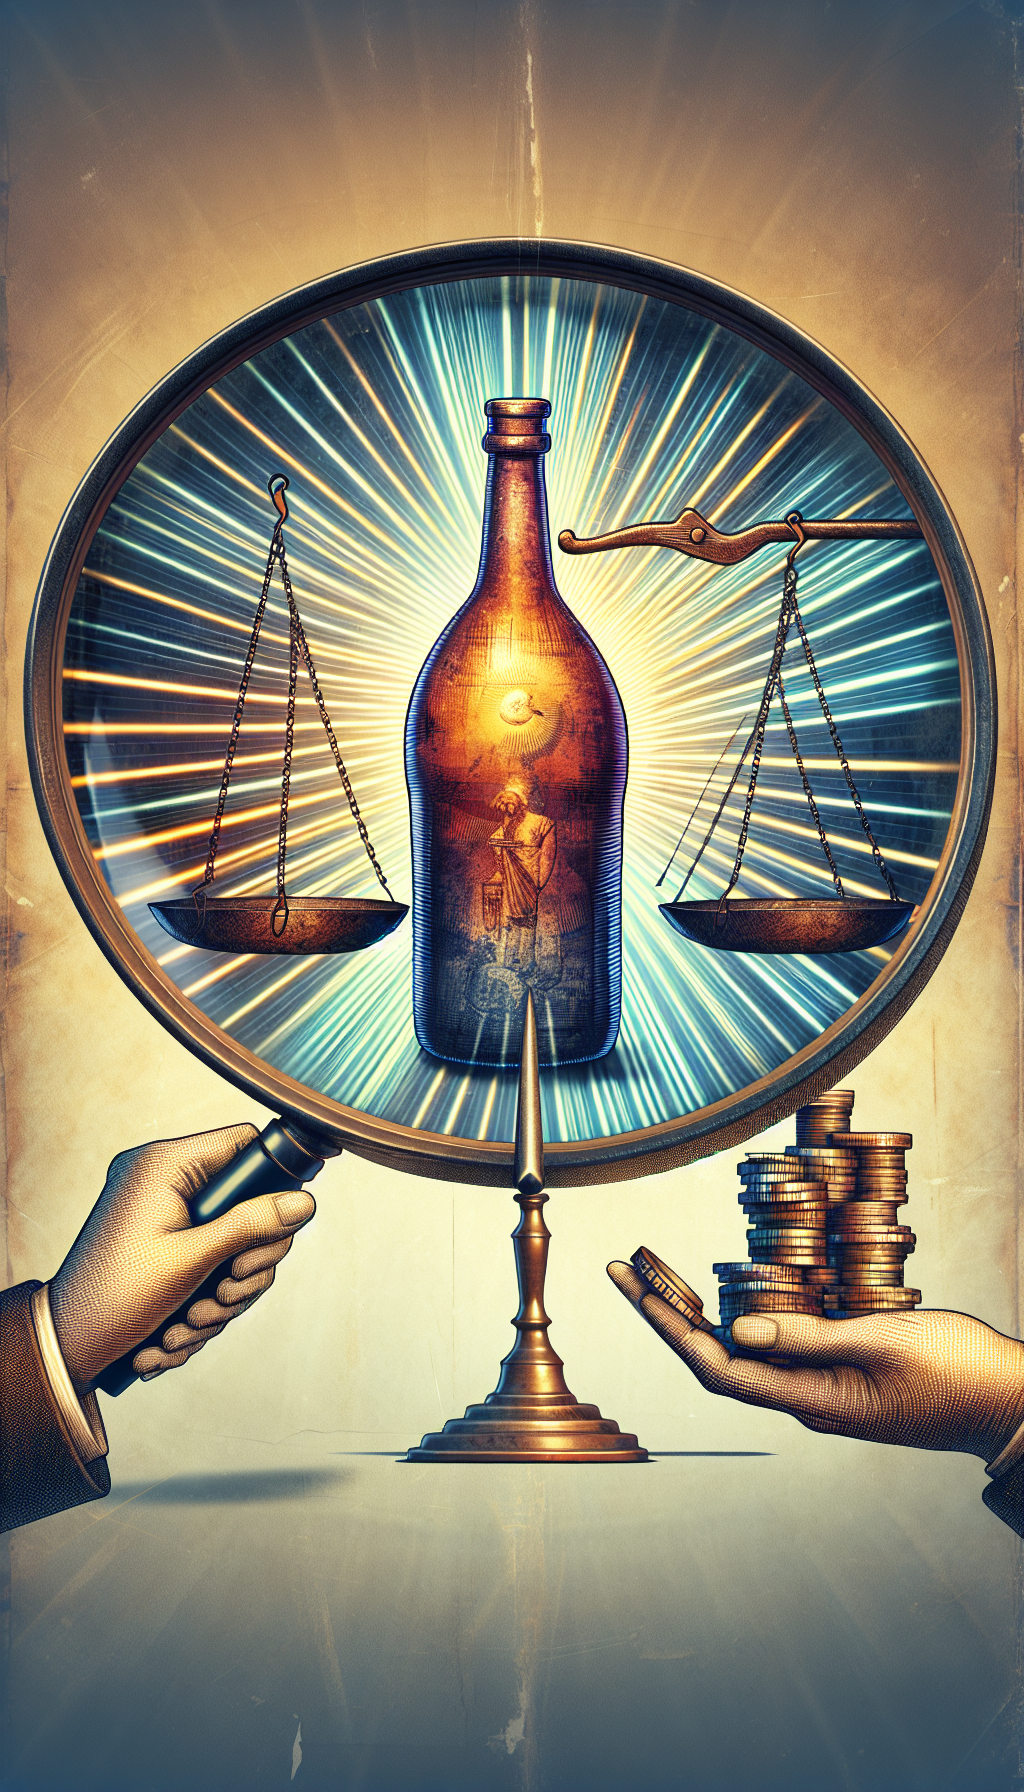 A magnifying glass is poised above an ancient, unevenly worn bottle, with lines emanating from it that highlight both its aged patina and subtle forgeries. Beneath, a dual-tone scale balances a pristine bottle on one side against a stack of vintage coins. The style shifts from realistic at the focal point to abstract around the edges, symbolizing the subjective nature of assessing old bottle values.